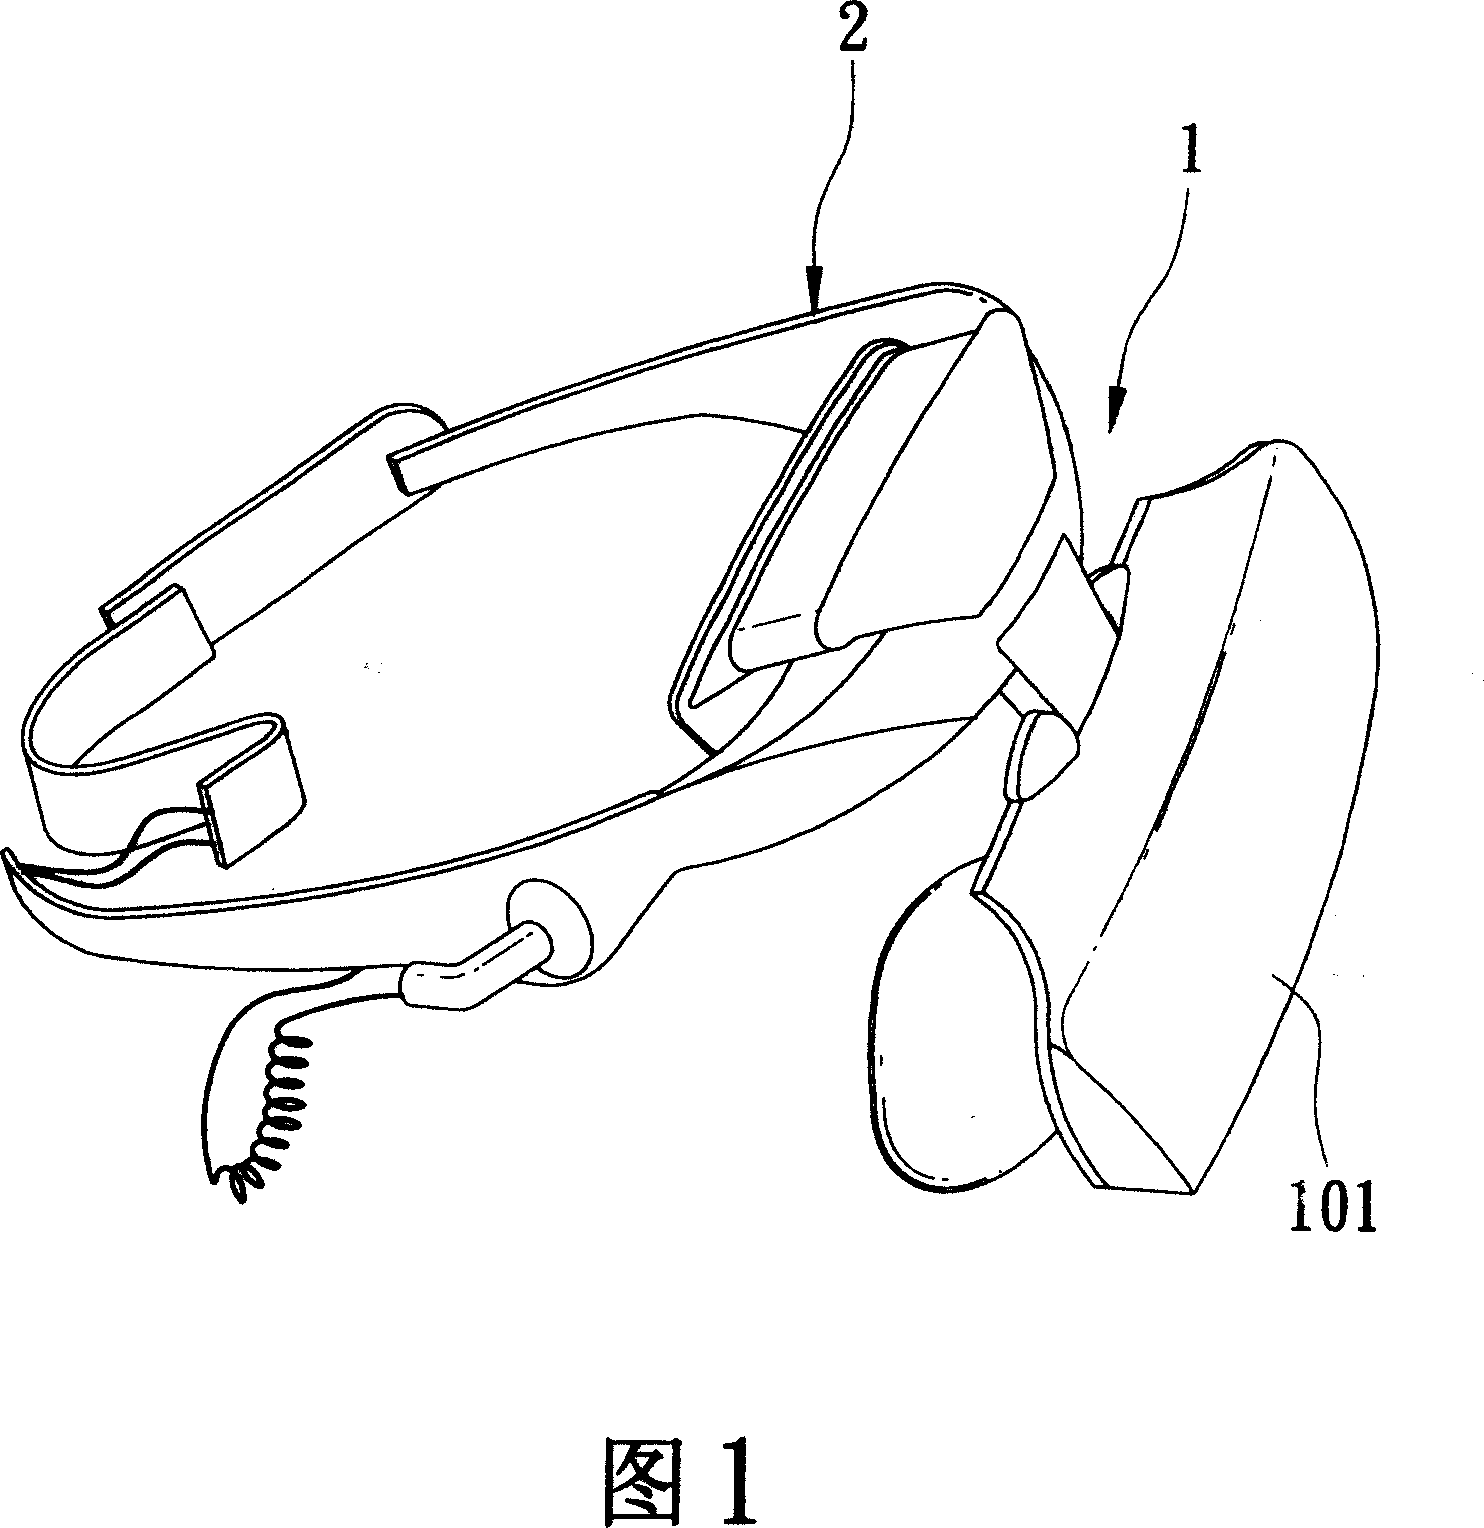 Adjustable viewing device